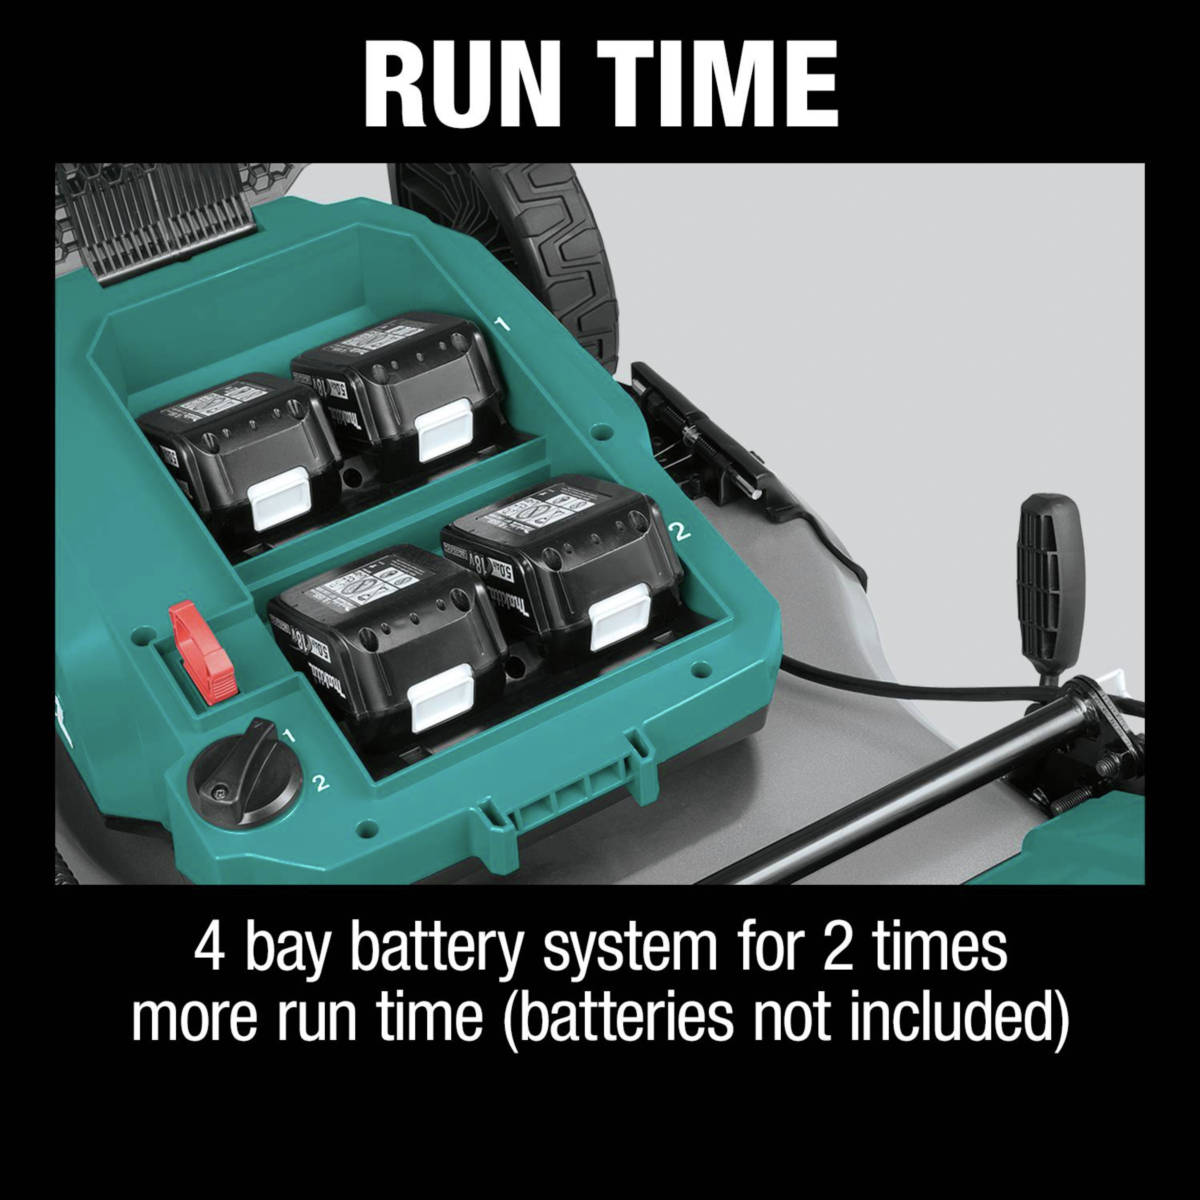 18V X2 (36V) LXT Lawn Mower has 4 bay battery system for 2x run time